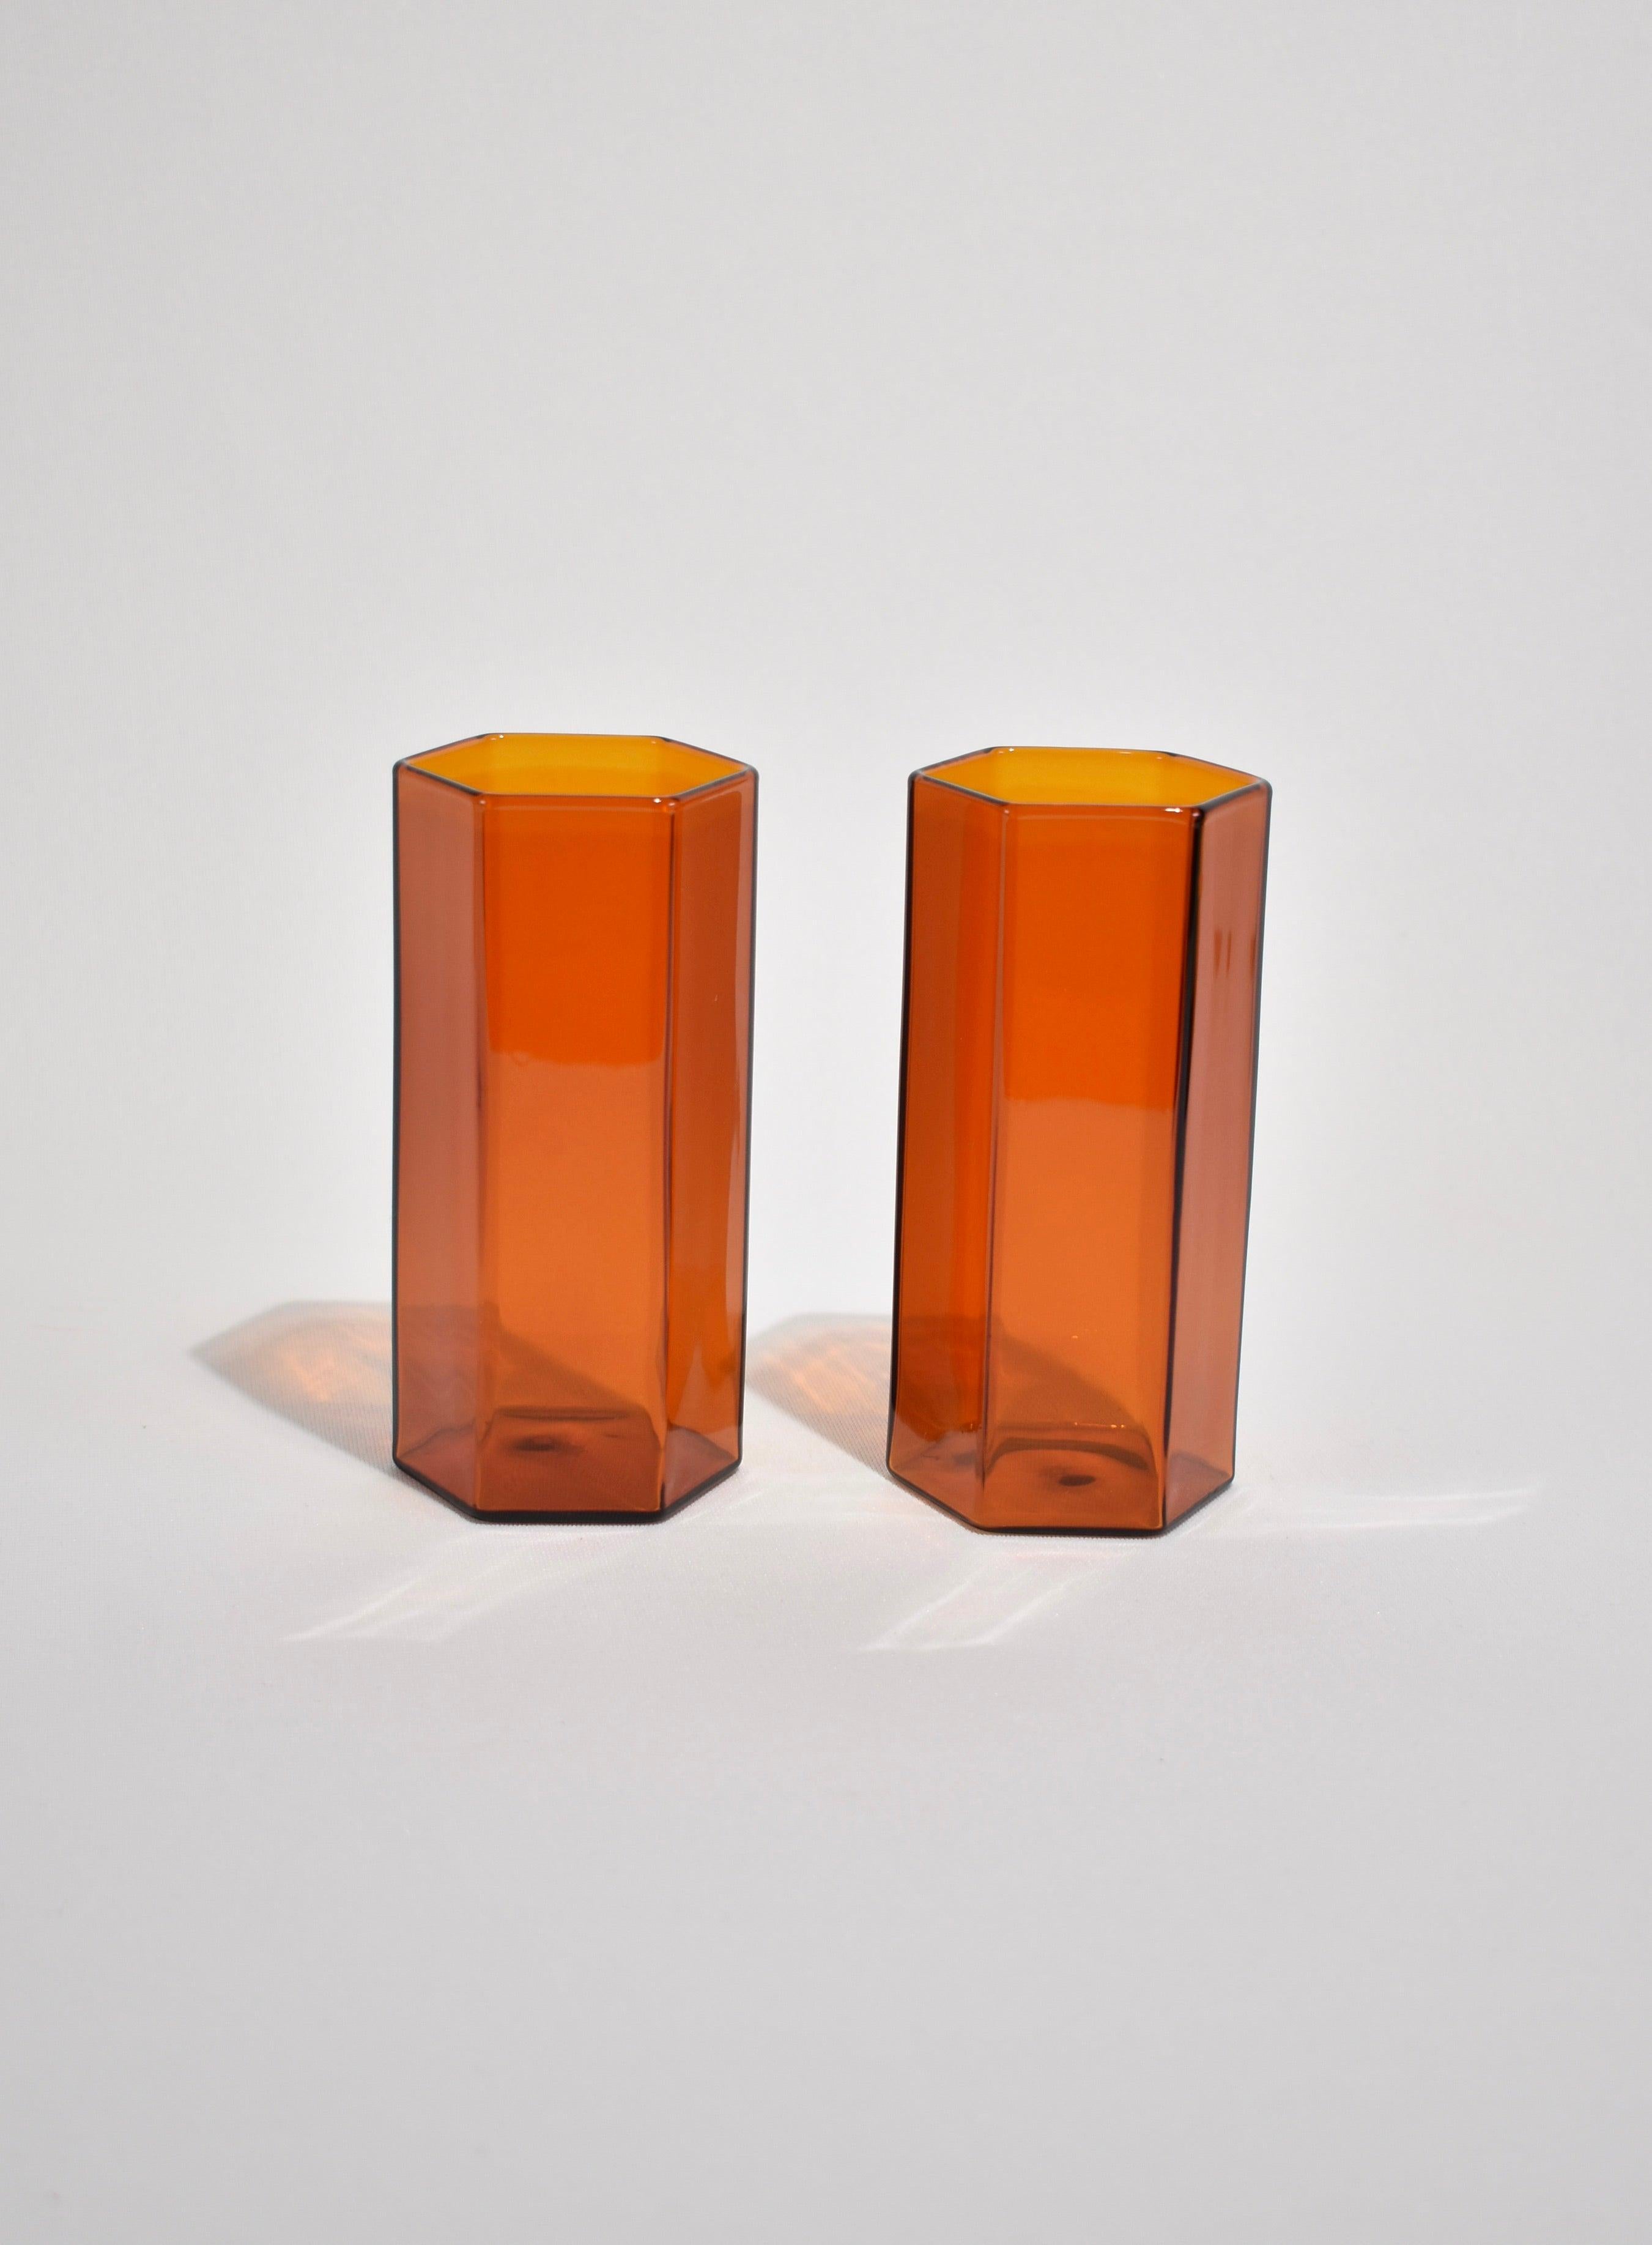 Set of two tall drinking glasses in a faceted silhouette by Maison Balzac.

Food grade colored glass, individually mouth blown. 
Heat and cold resistant.
Hand wash recommended.